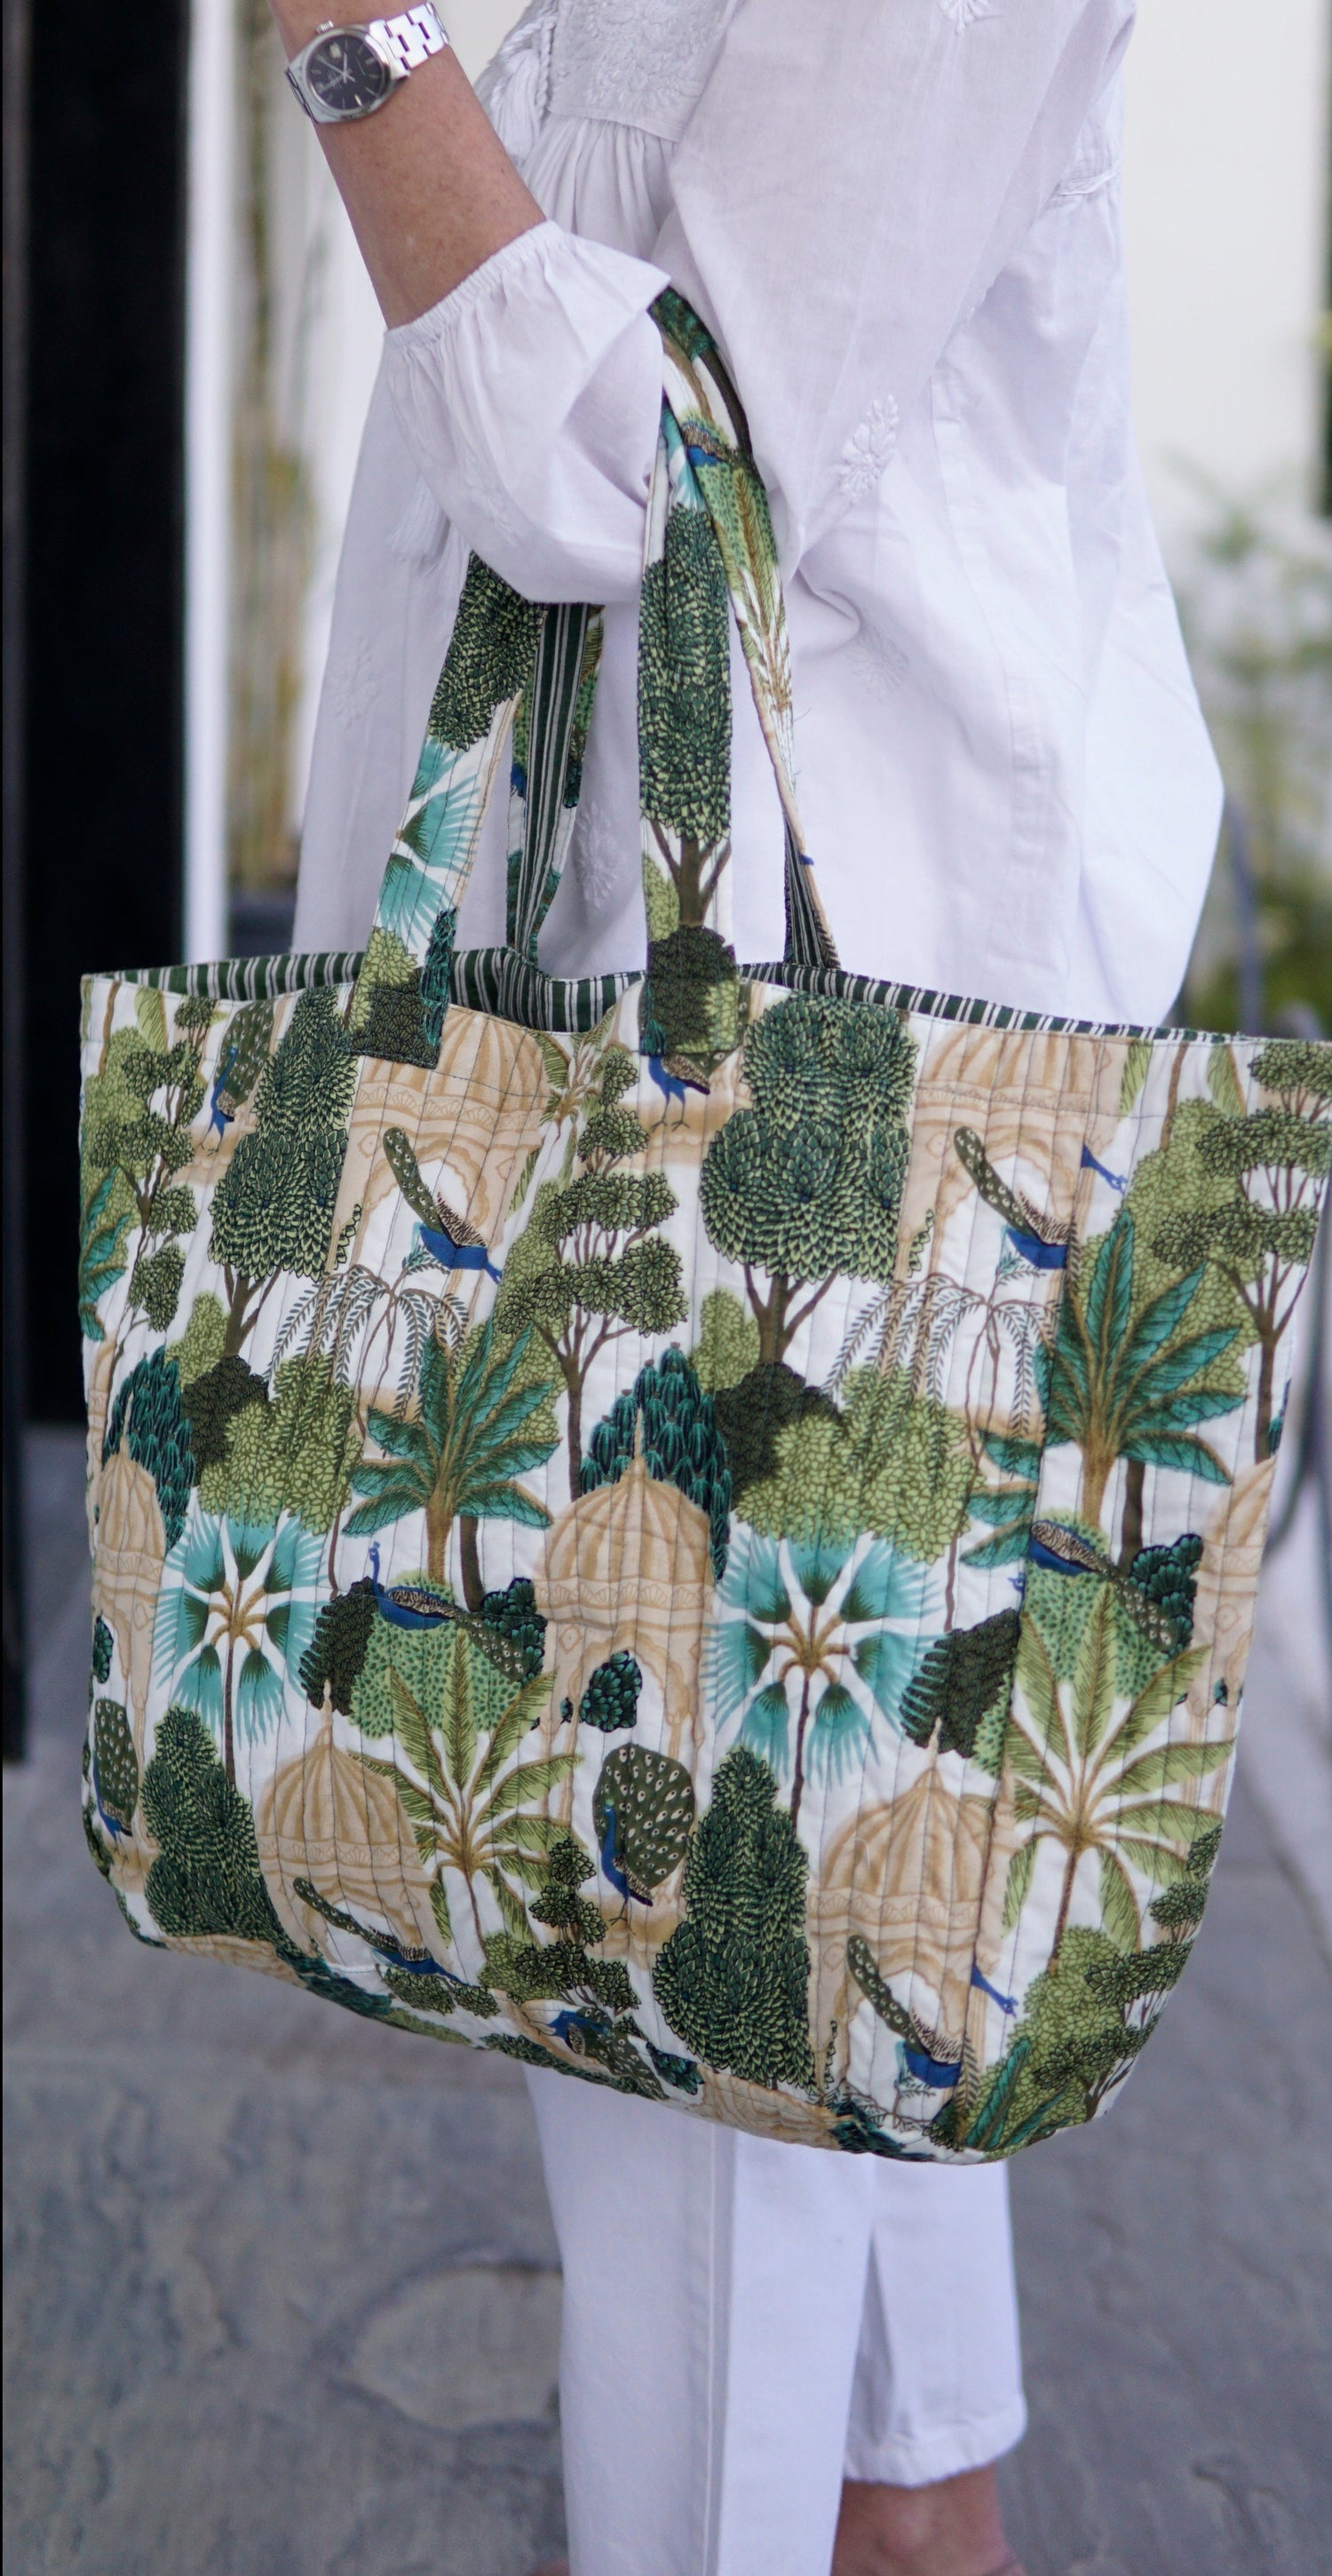 Bag, XL quilted cotton tote bag,  contrast lining with pocket. reversible beach bag